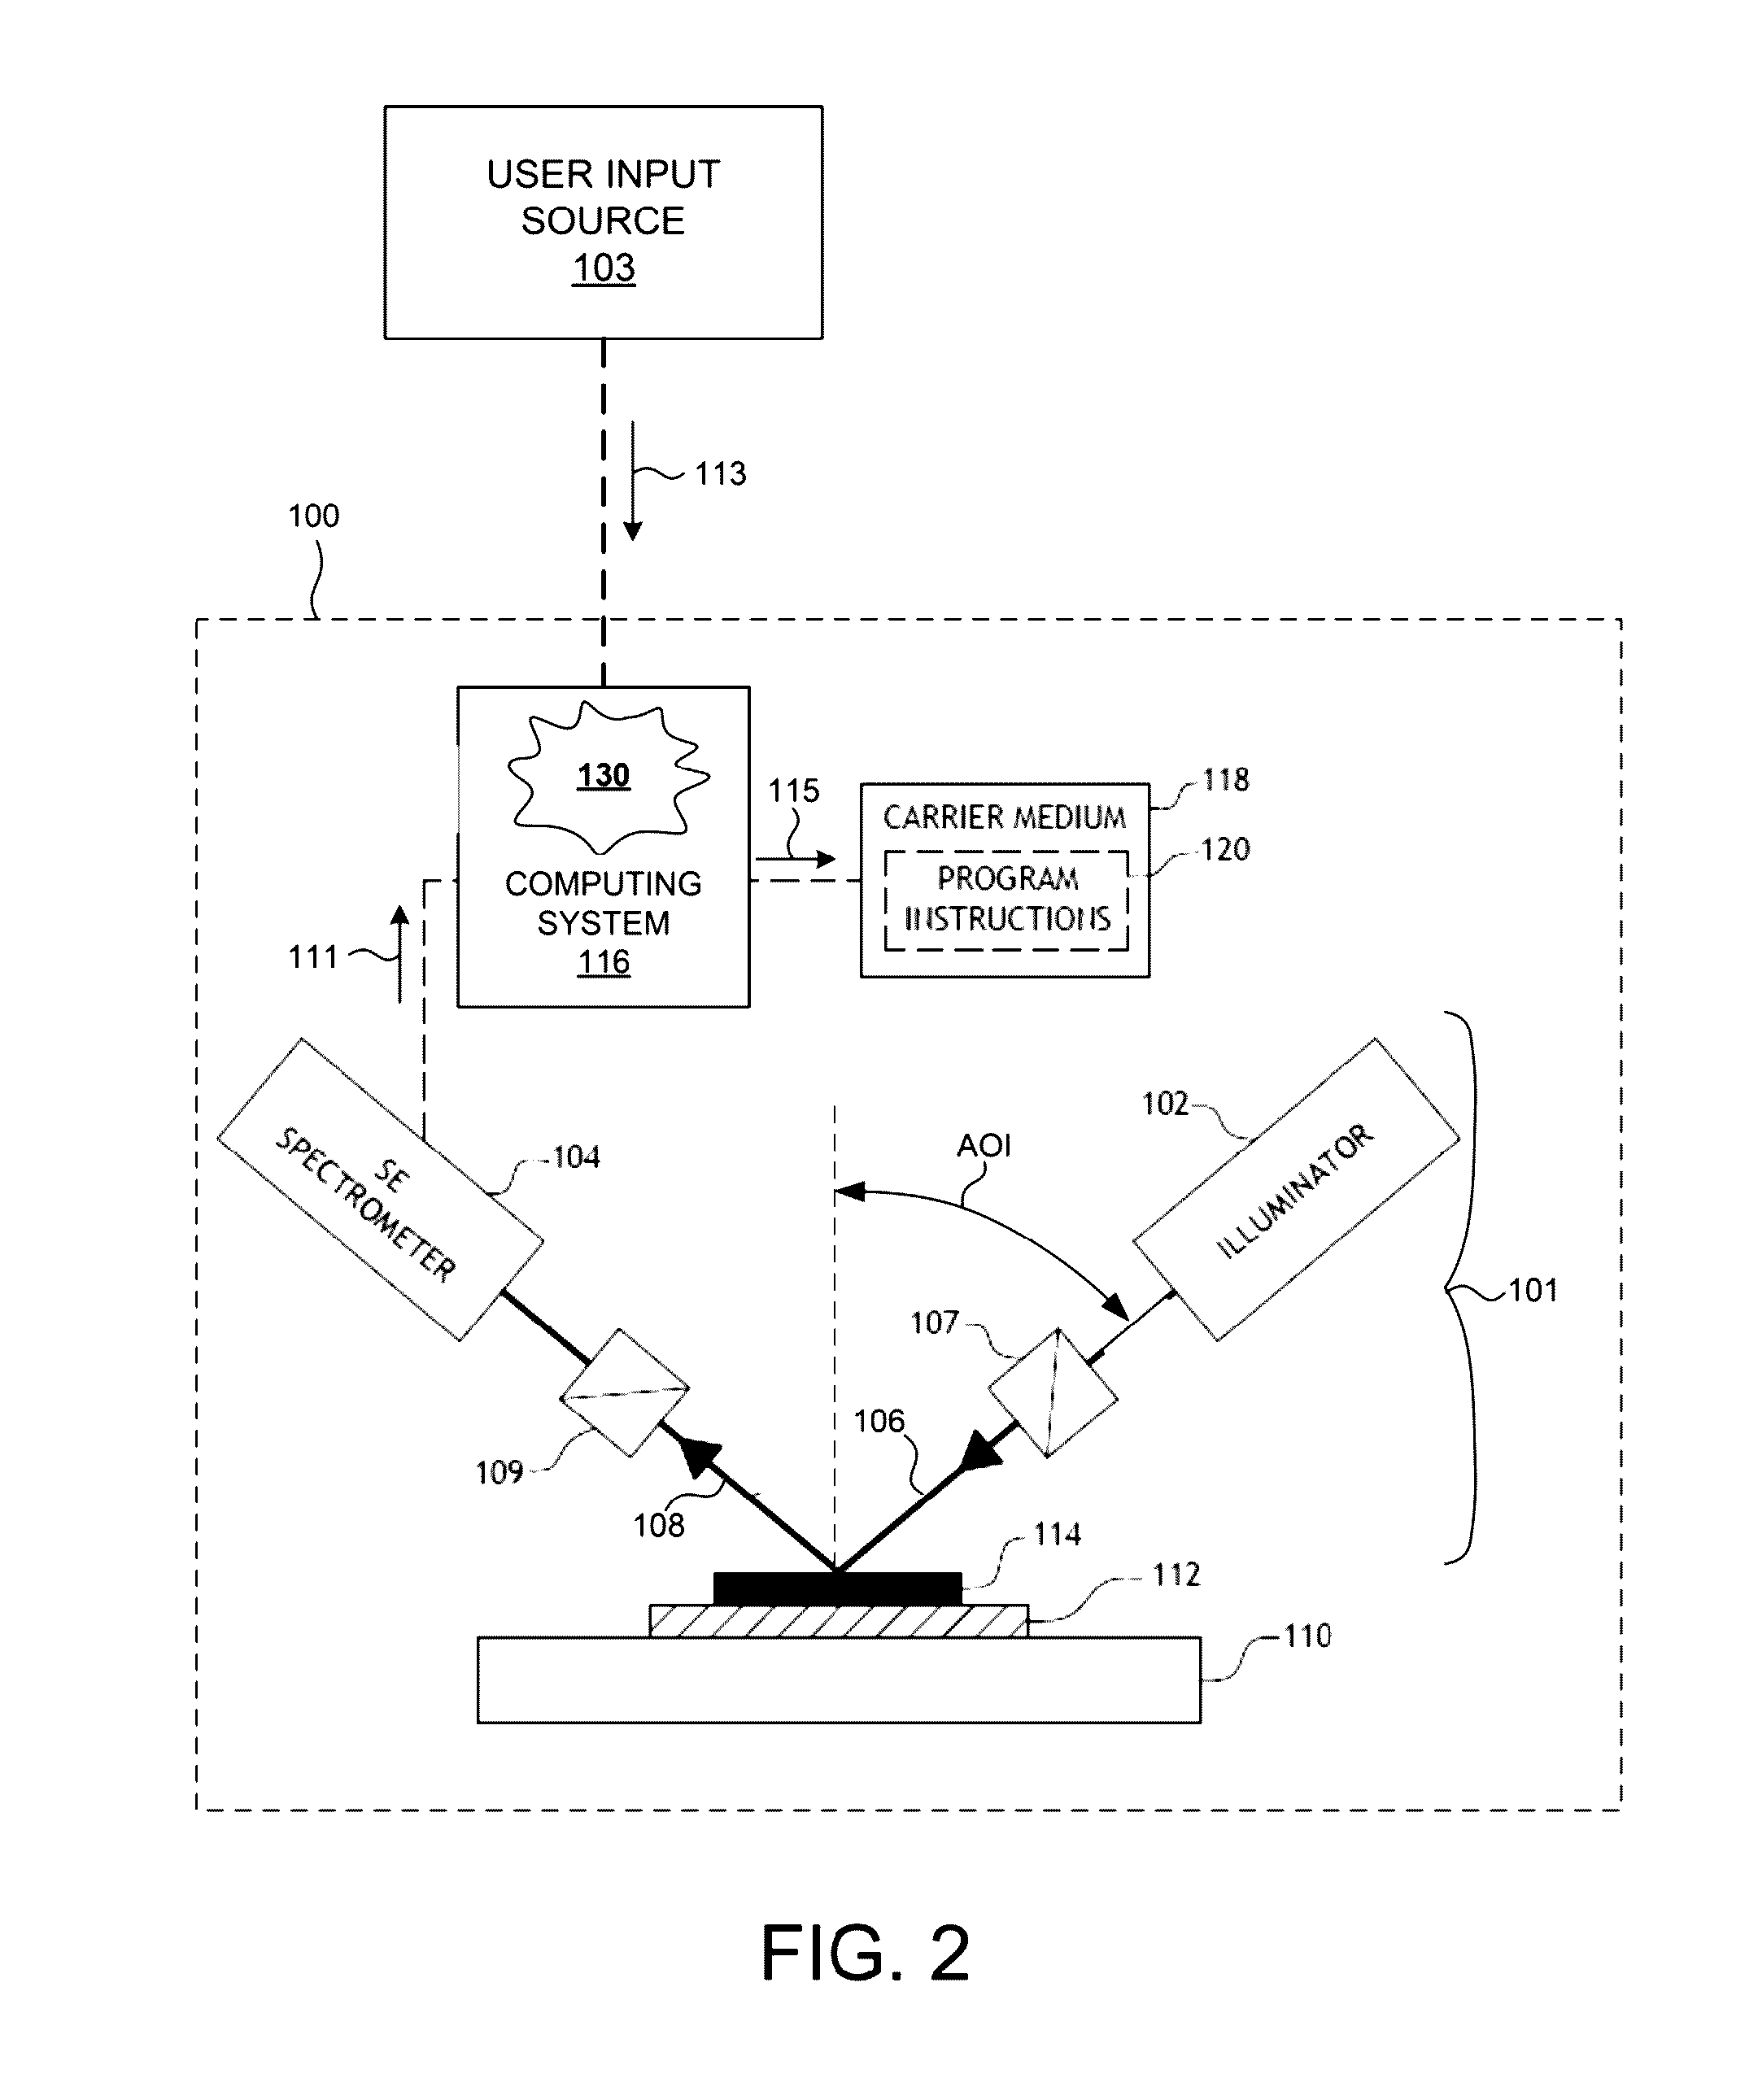 Semiconductor device models including re-usable sub-structures